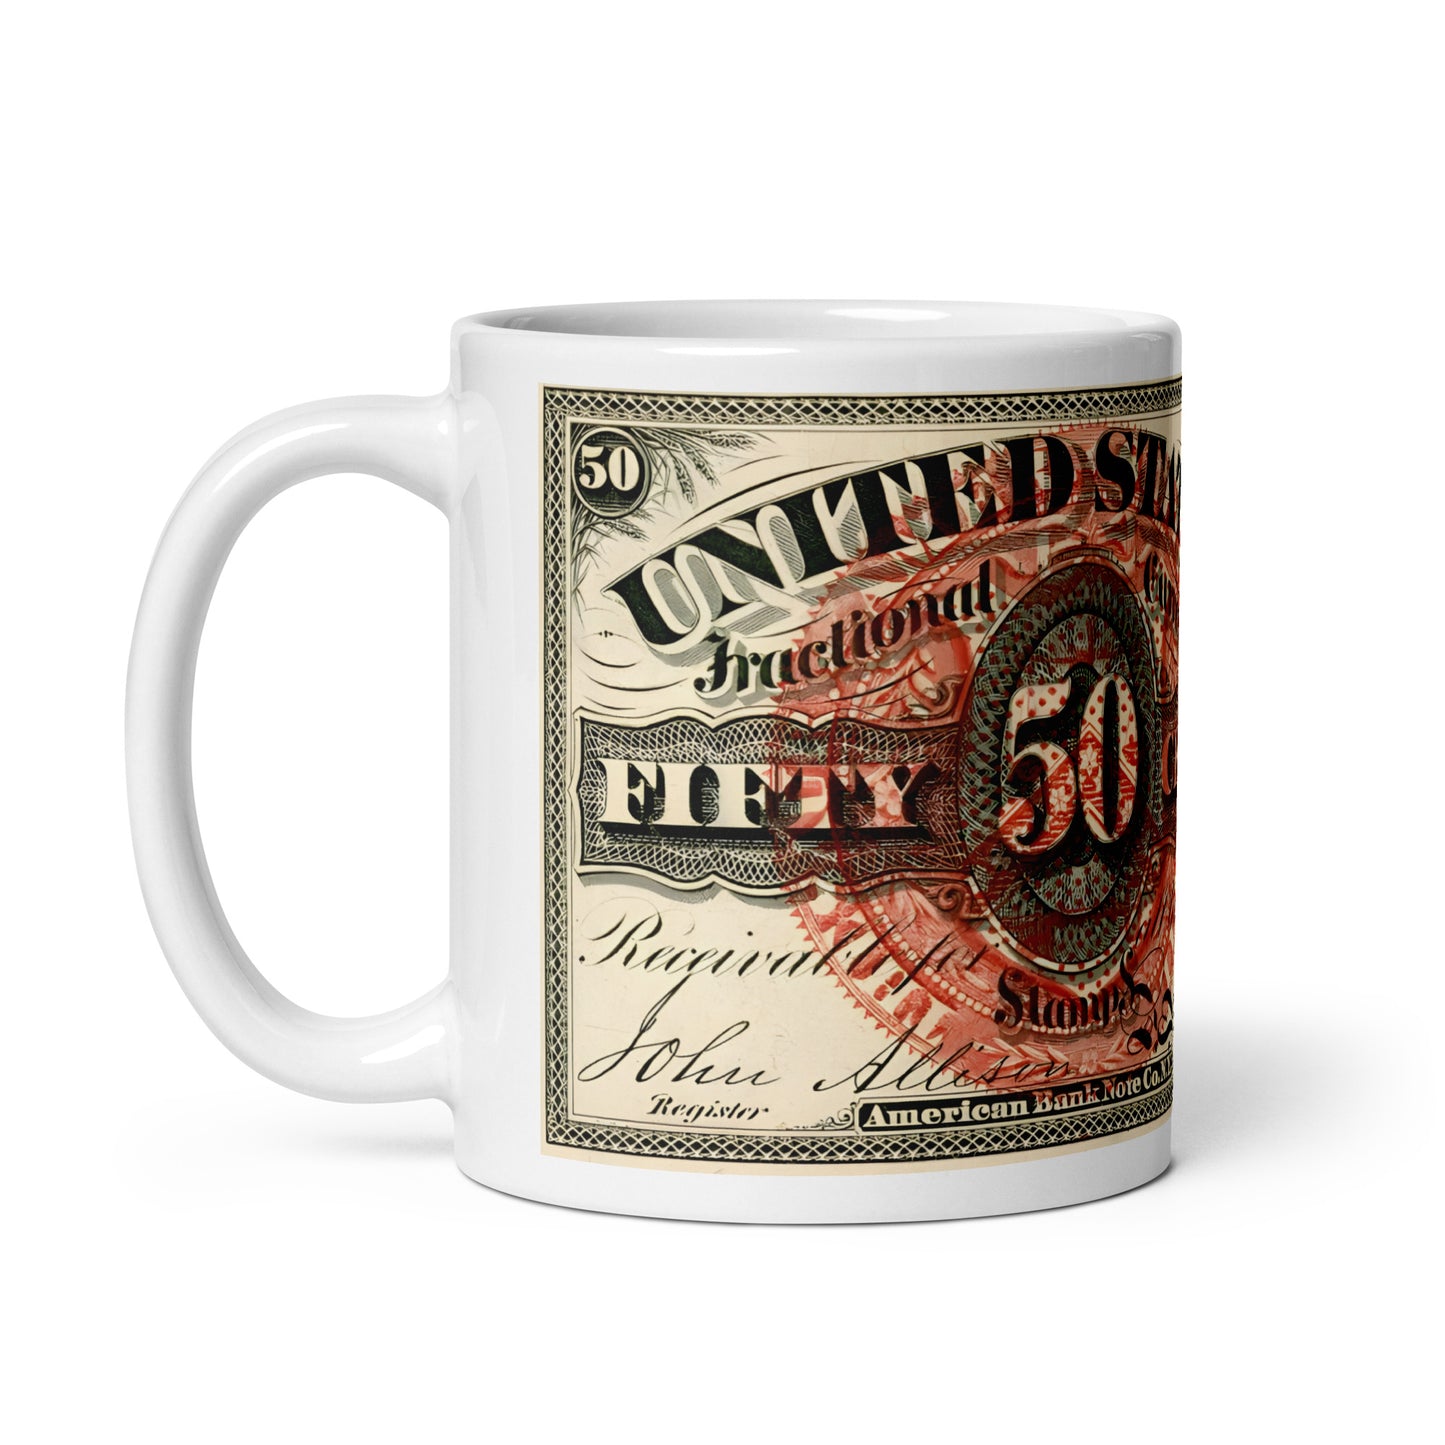 50 Cents 4TH Issue Fractional Currency (Abraham Lincoln) Edition - Classic Currency Collector's Mug